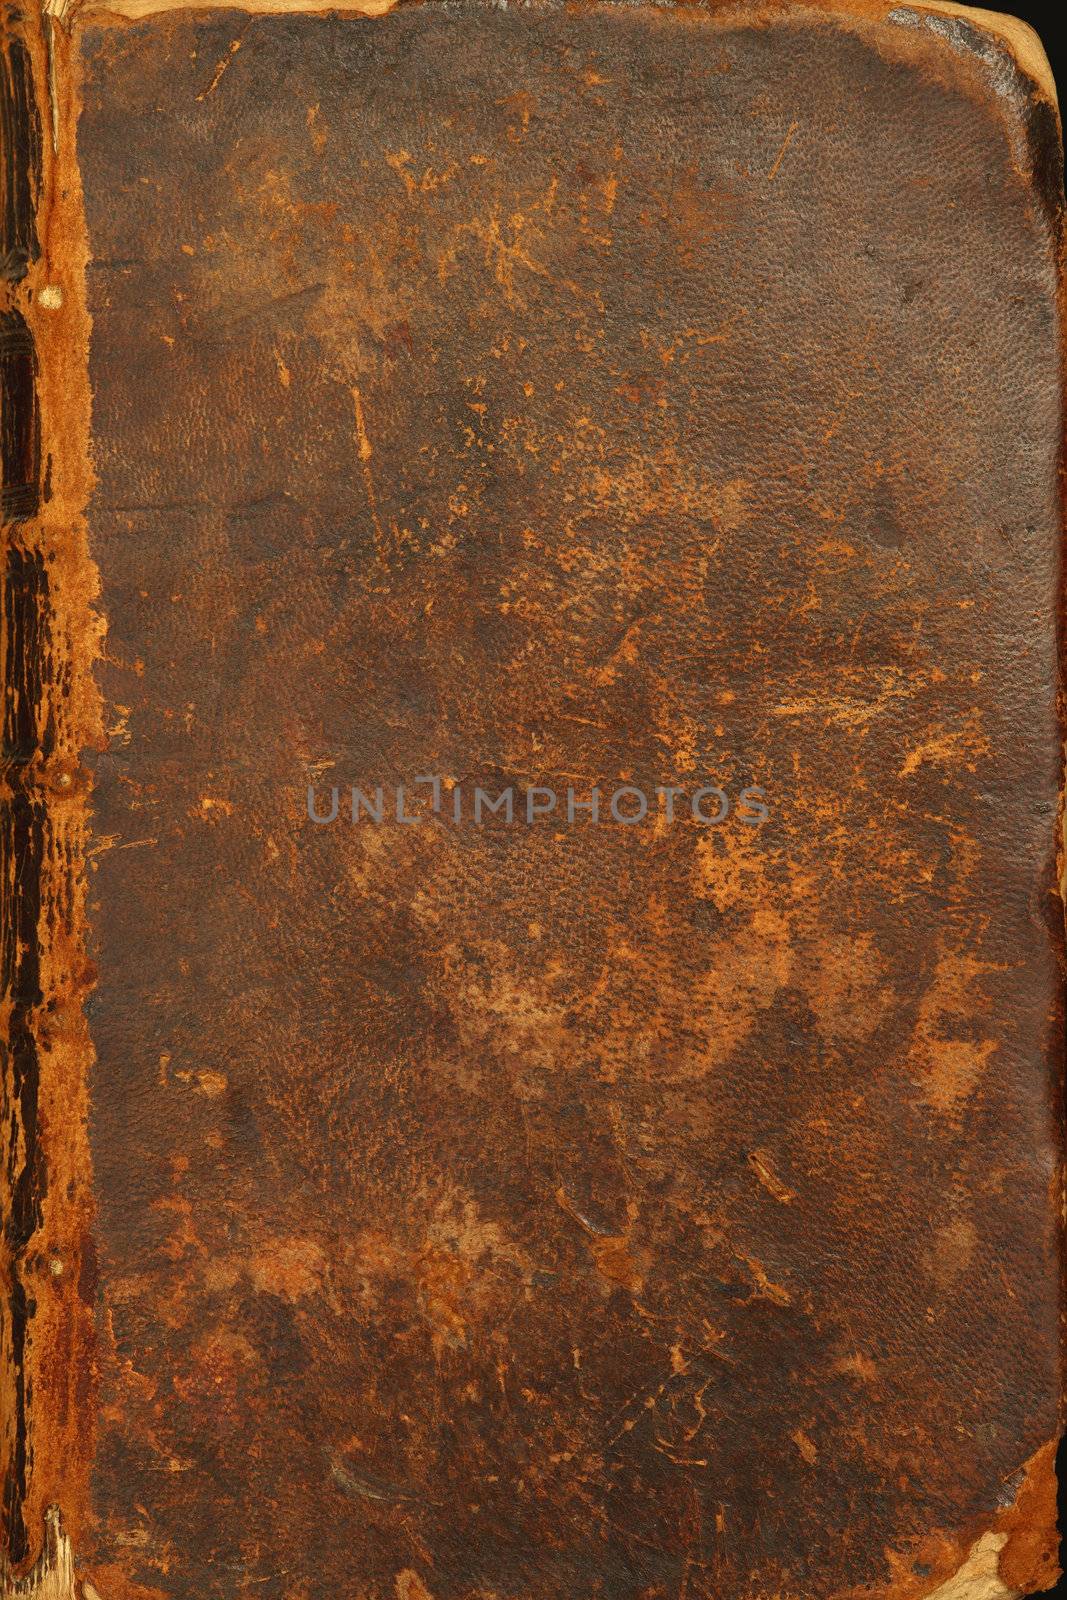 Photo of the tattered cover of a bible from 1786.